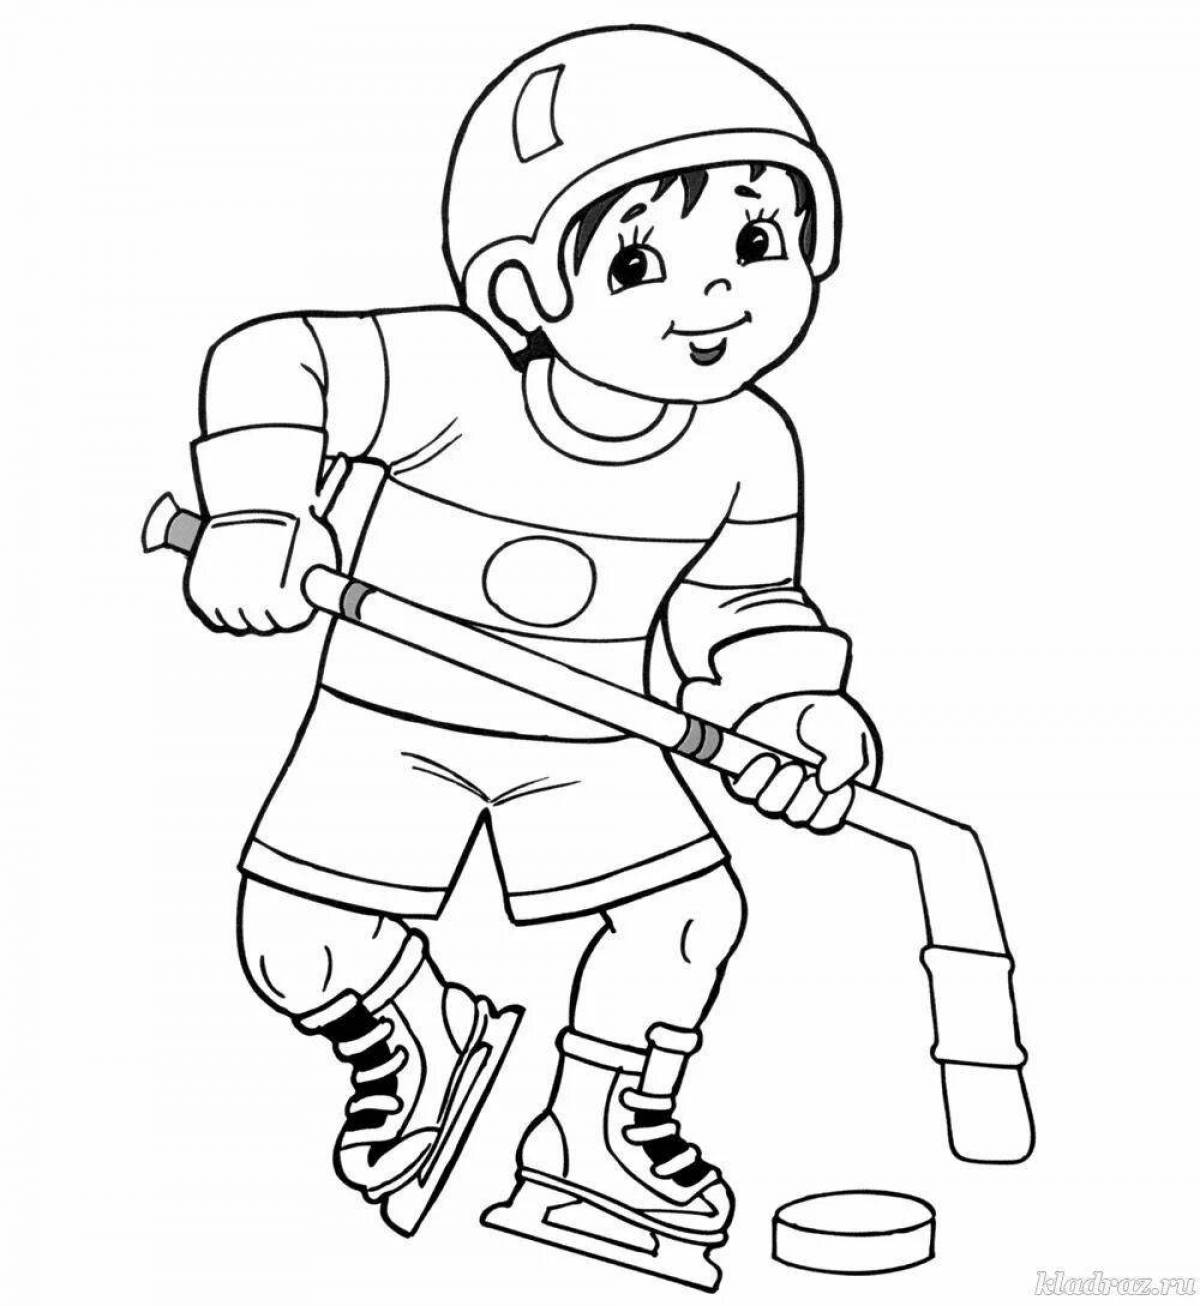 Outstanding sports coloring book for 3-4 year olds